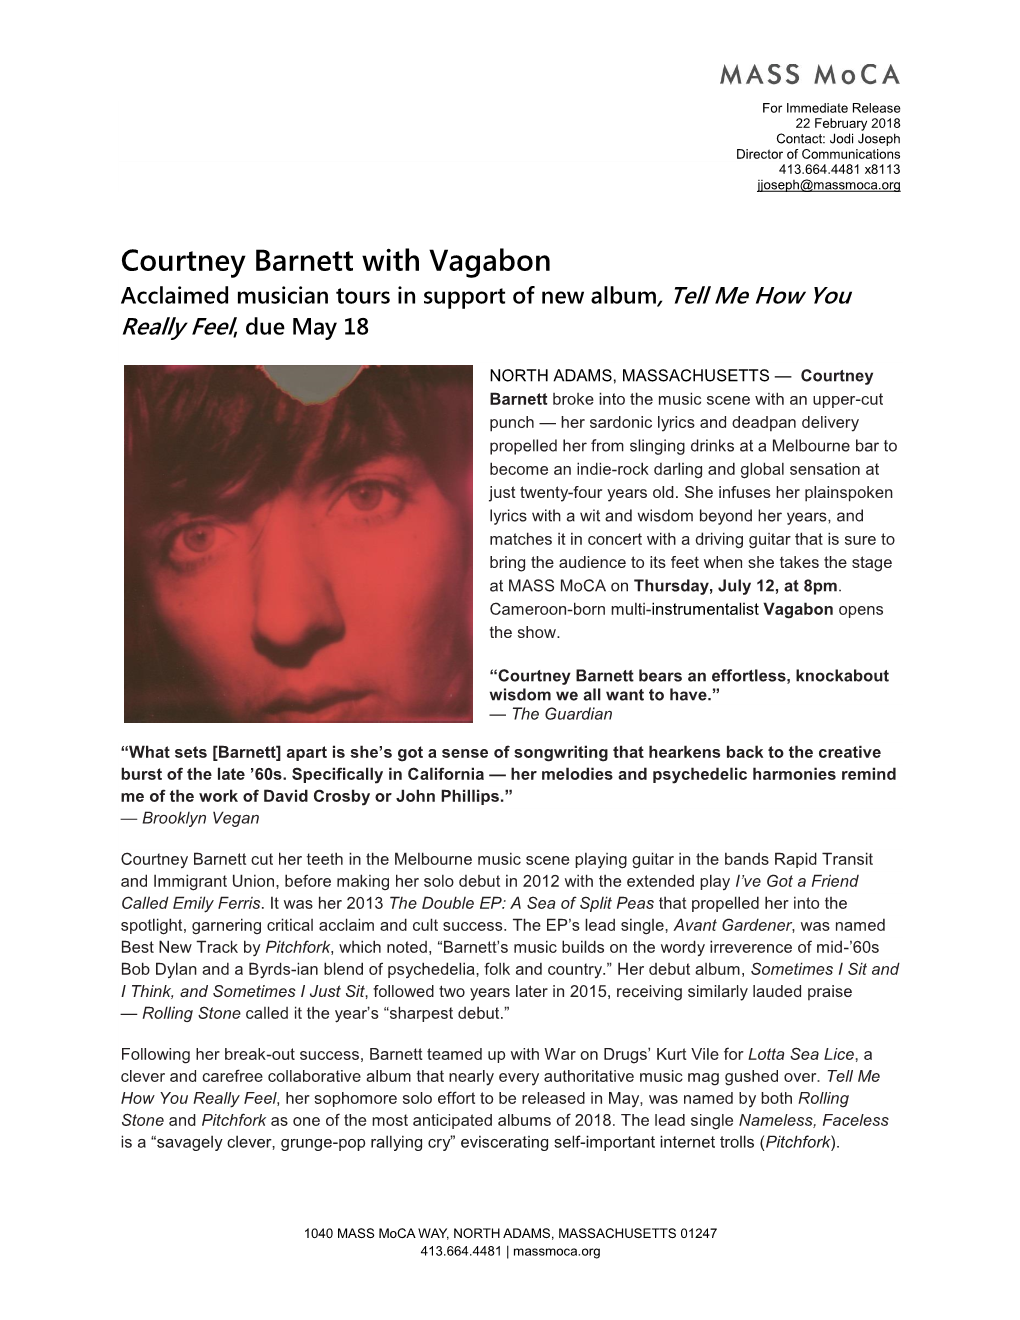 Courtney Barnett with Vagabon Acclaimed Musician Tours in Support of New Album, Tell Me How You Really Feel, Due May 18